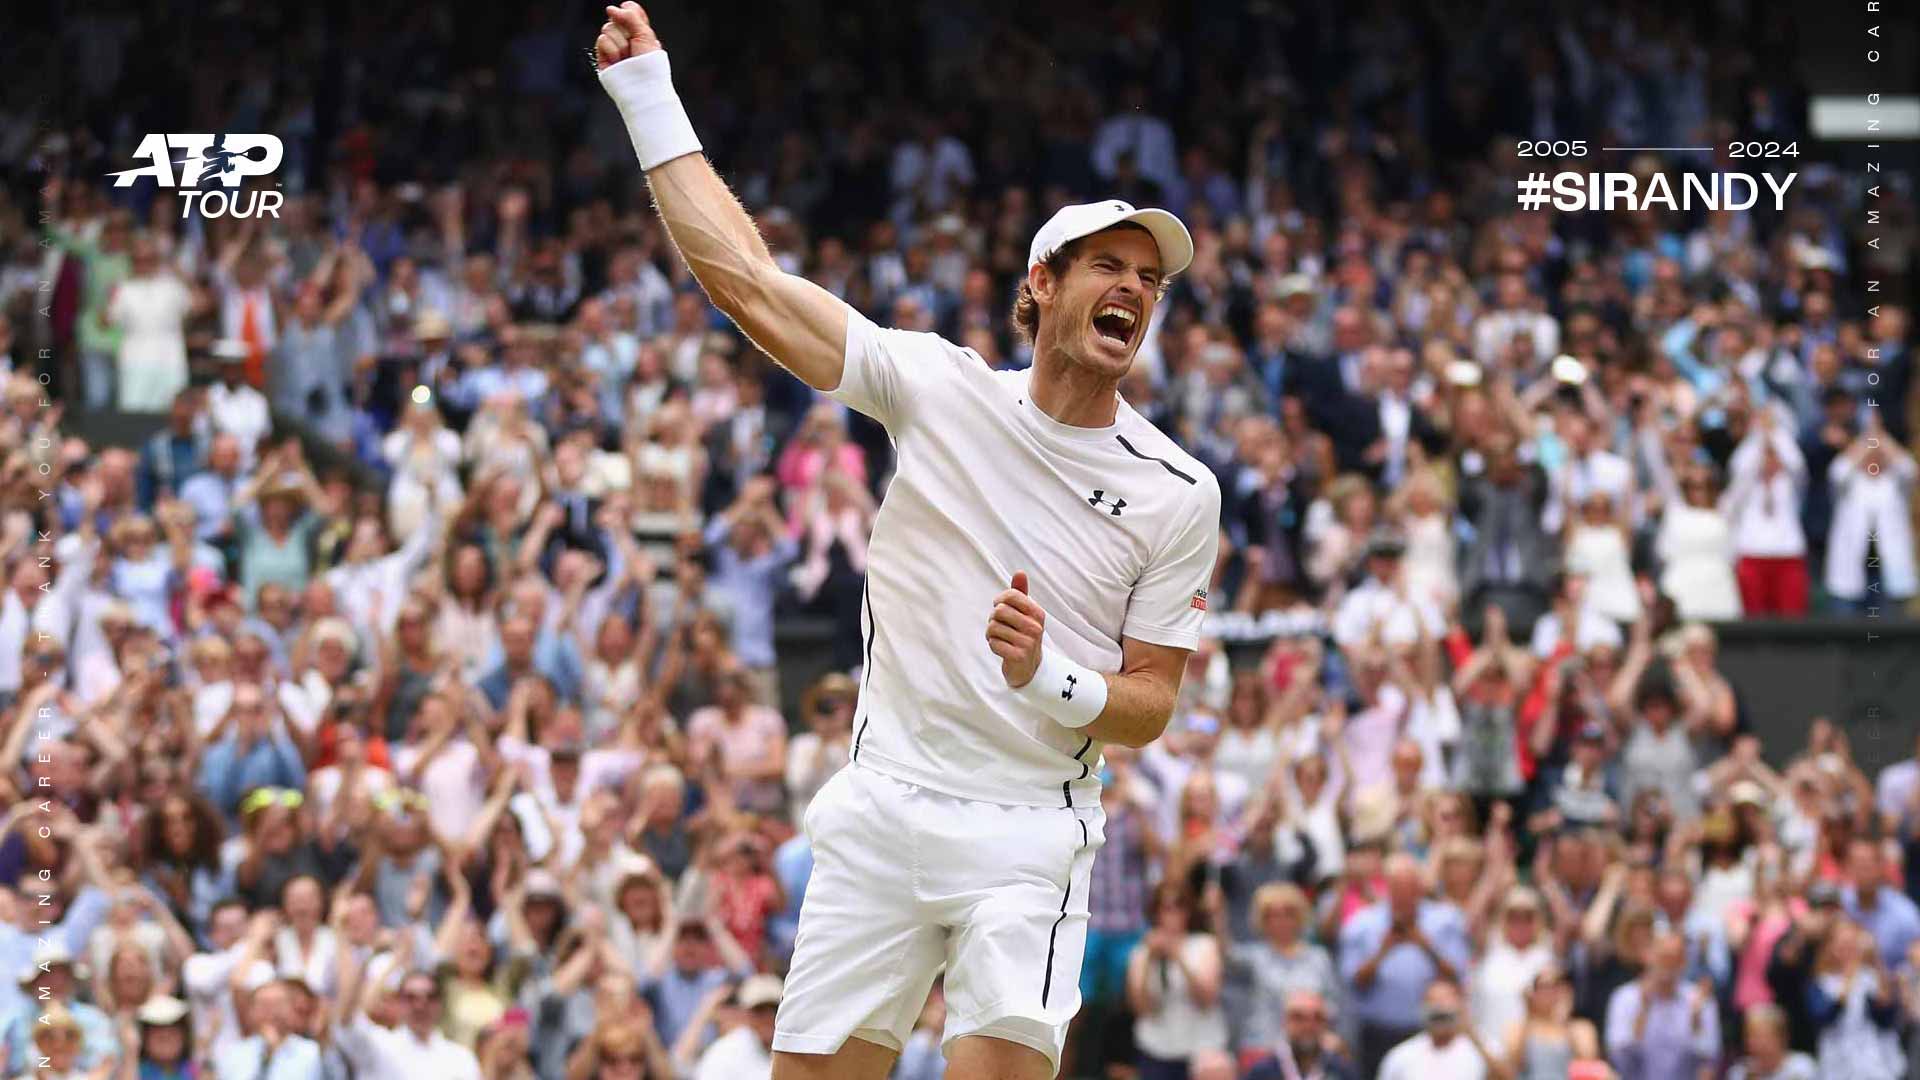 Andy Murray: A Legacy Of Perseverance & Resilience